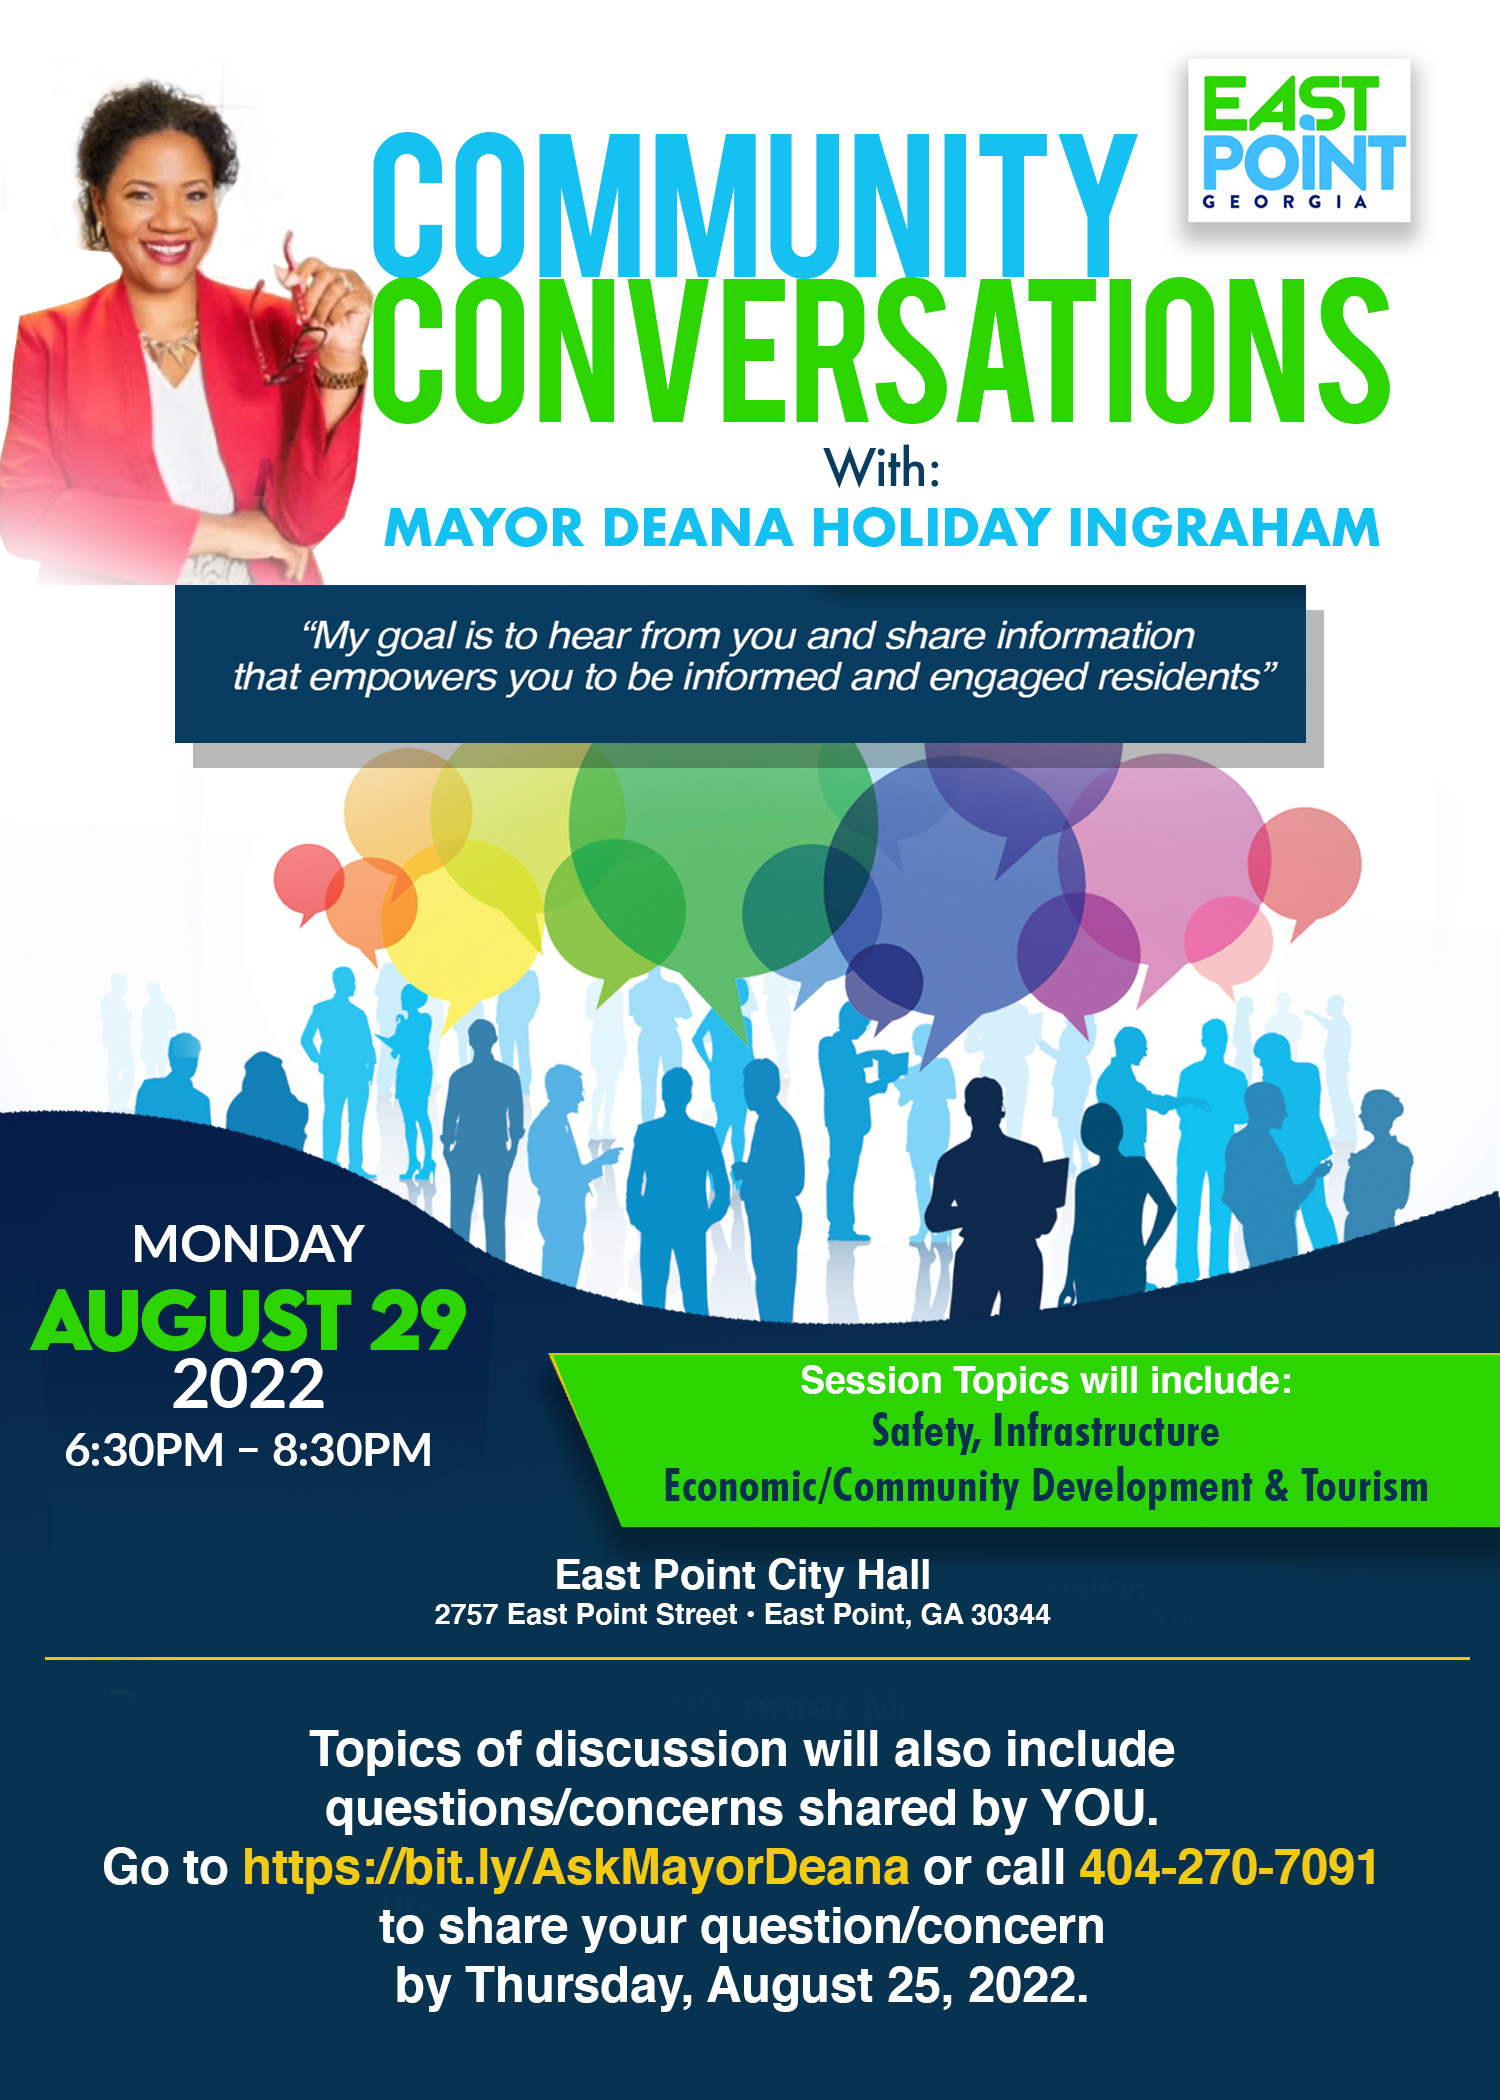 Community Conversations with Mayor Deana August 29th from 6:30 p.m. -8:30 p.m. at City Hall